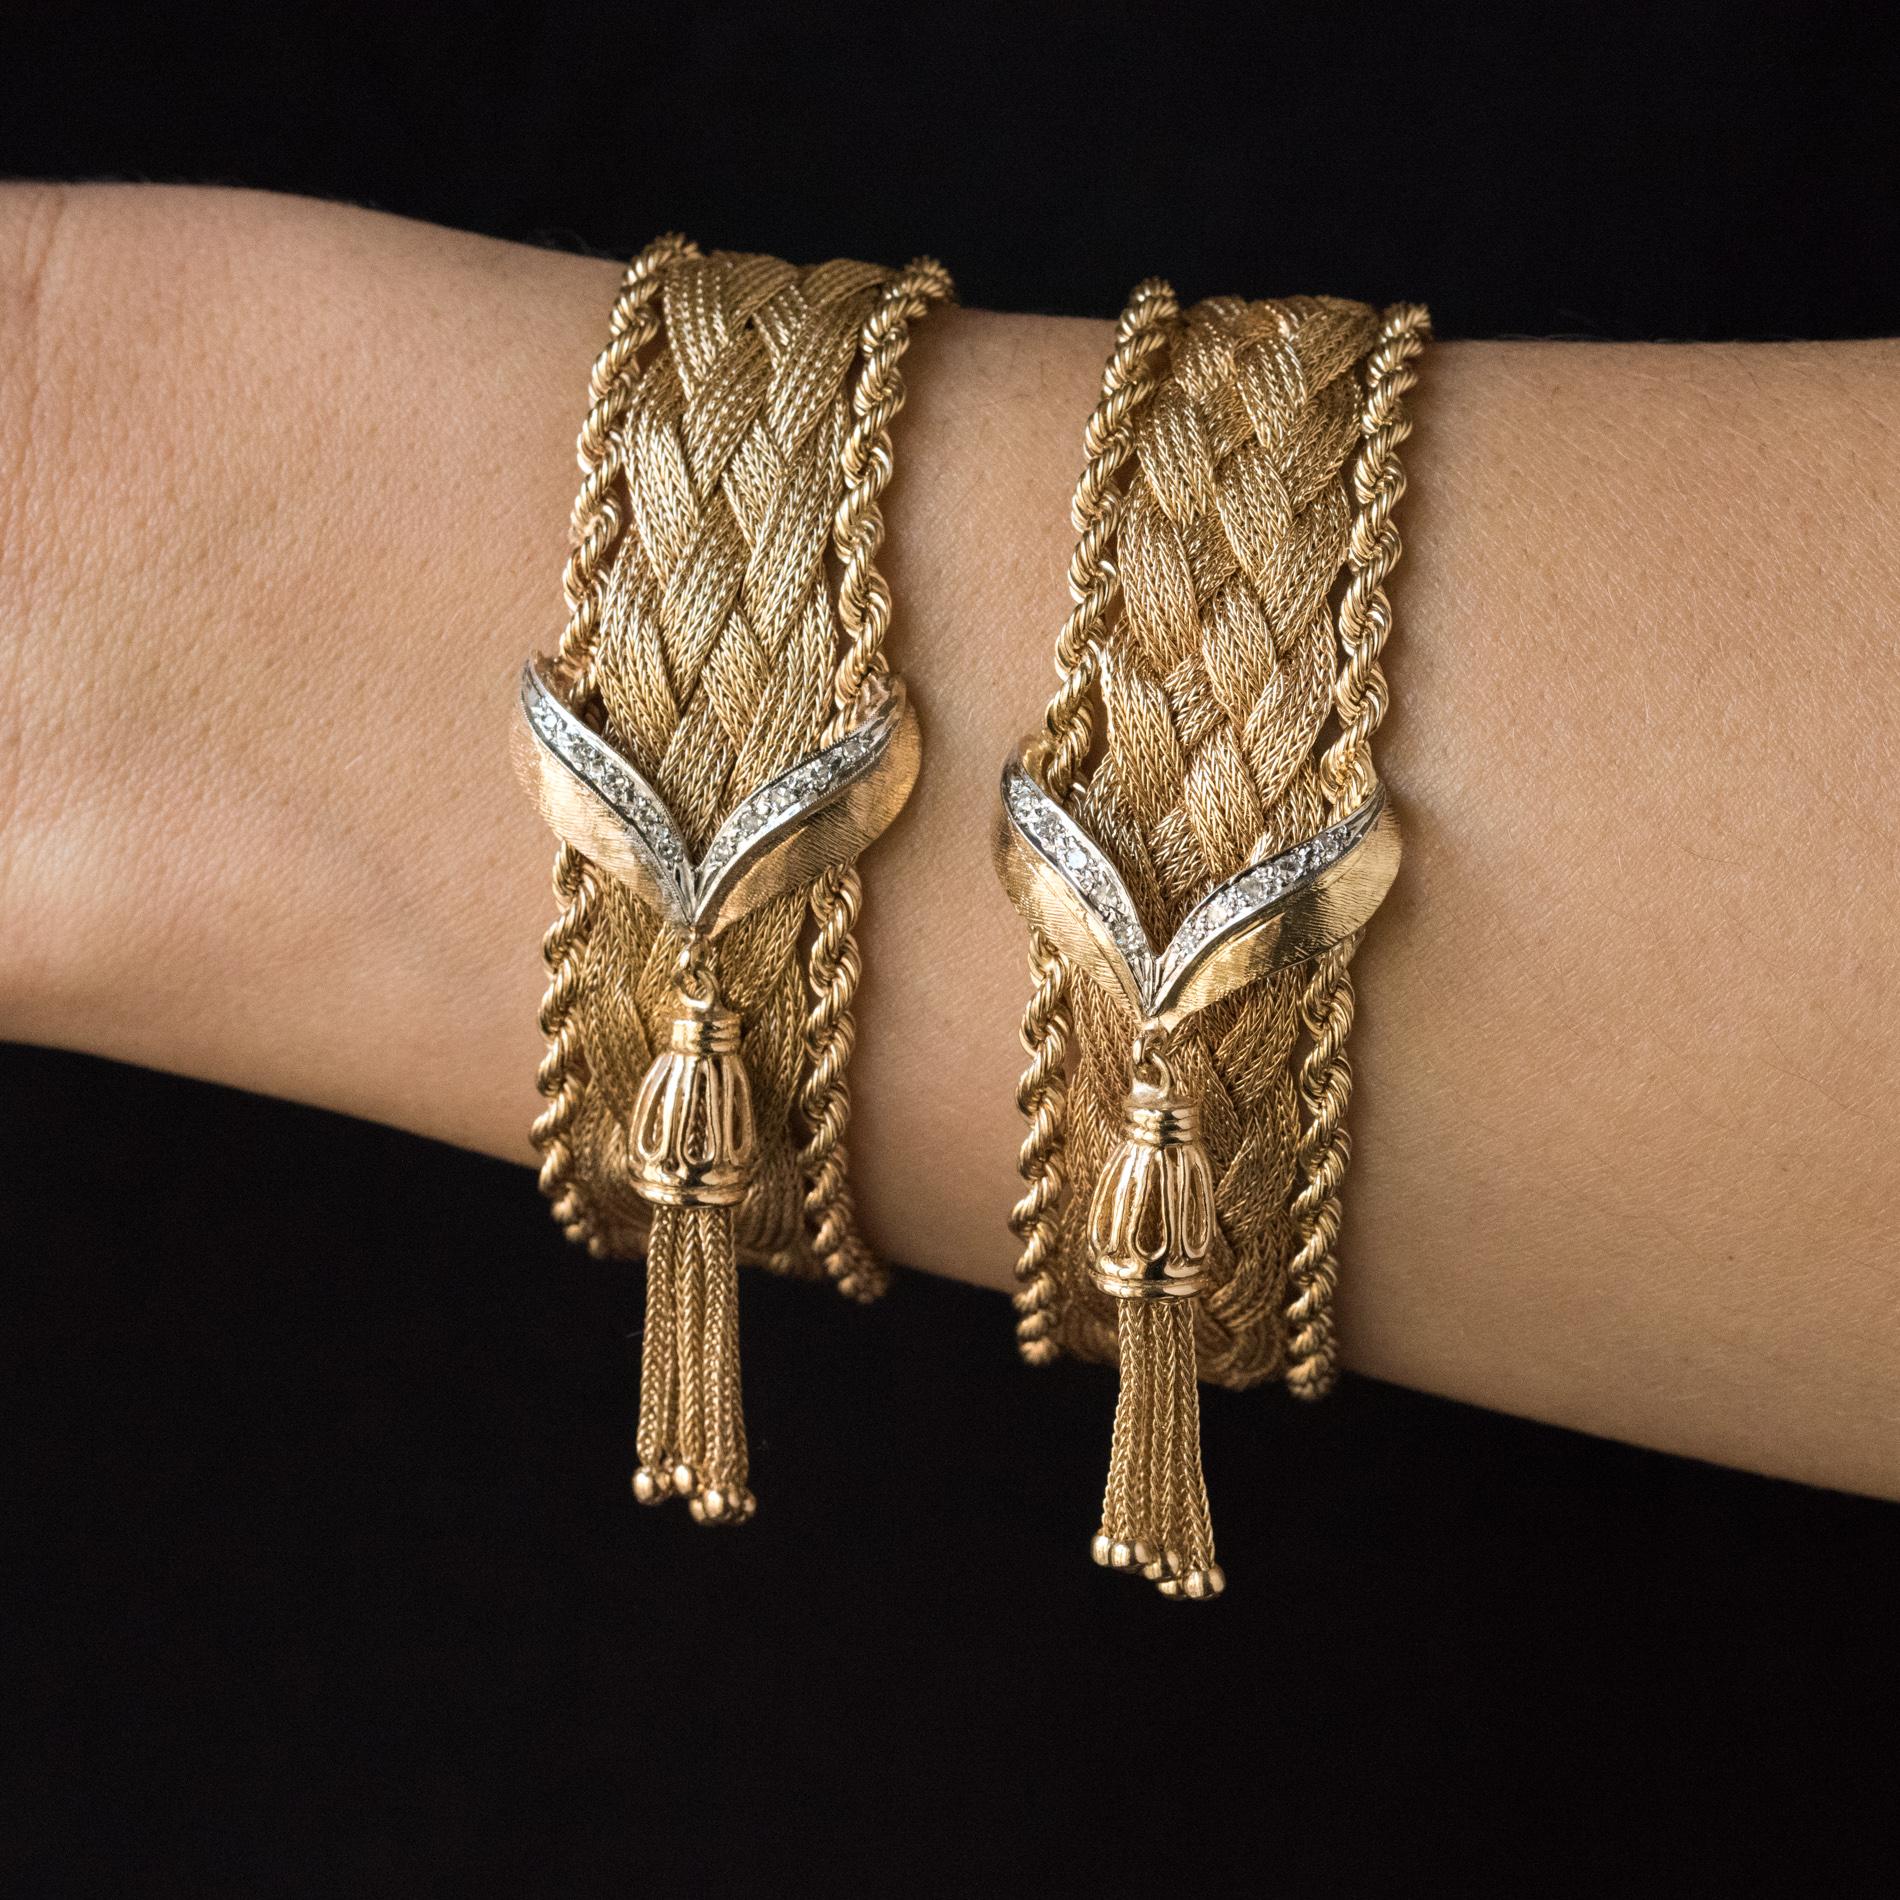 Bracelets in 14 karats yellow gold.
Splendid retro bracelets, each of them are composed of a flat braid made of gold threads and bordered on both sides by a rope of gold threads. At the center of each vintage bracelet is a pattern like a gold drape